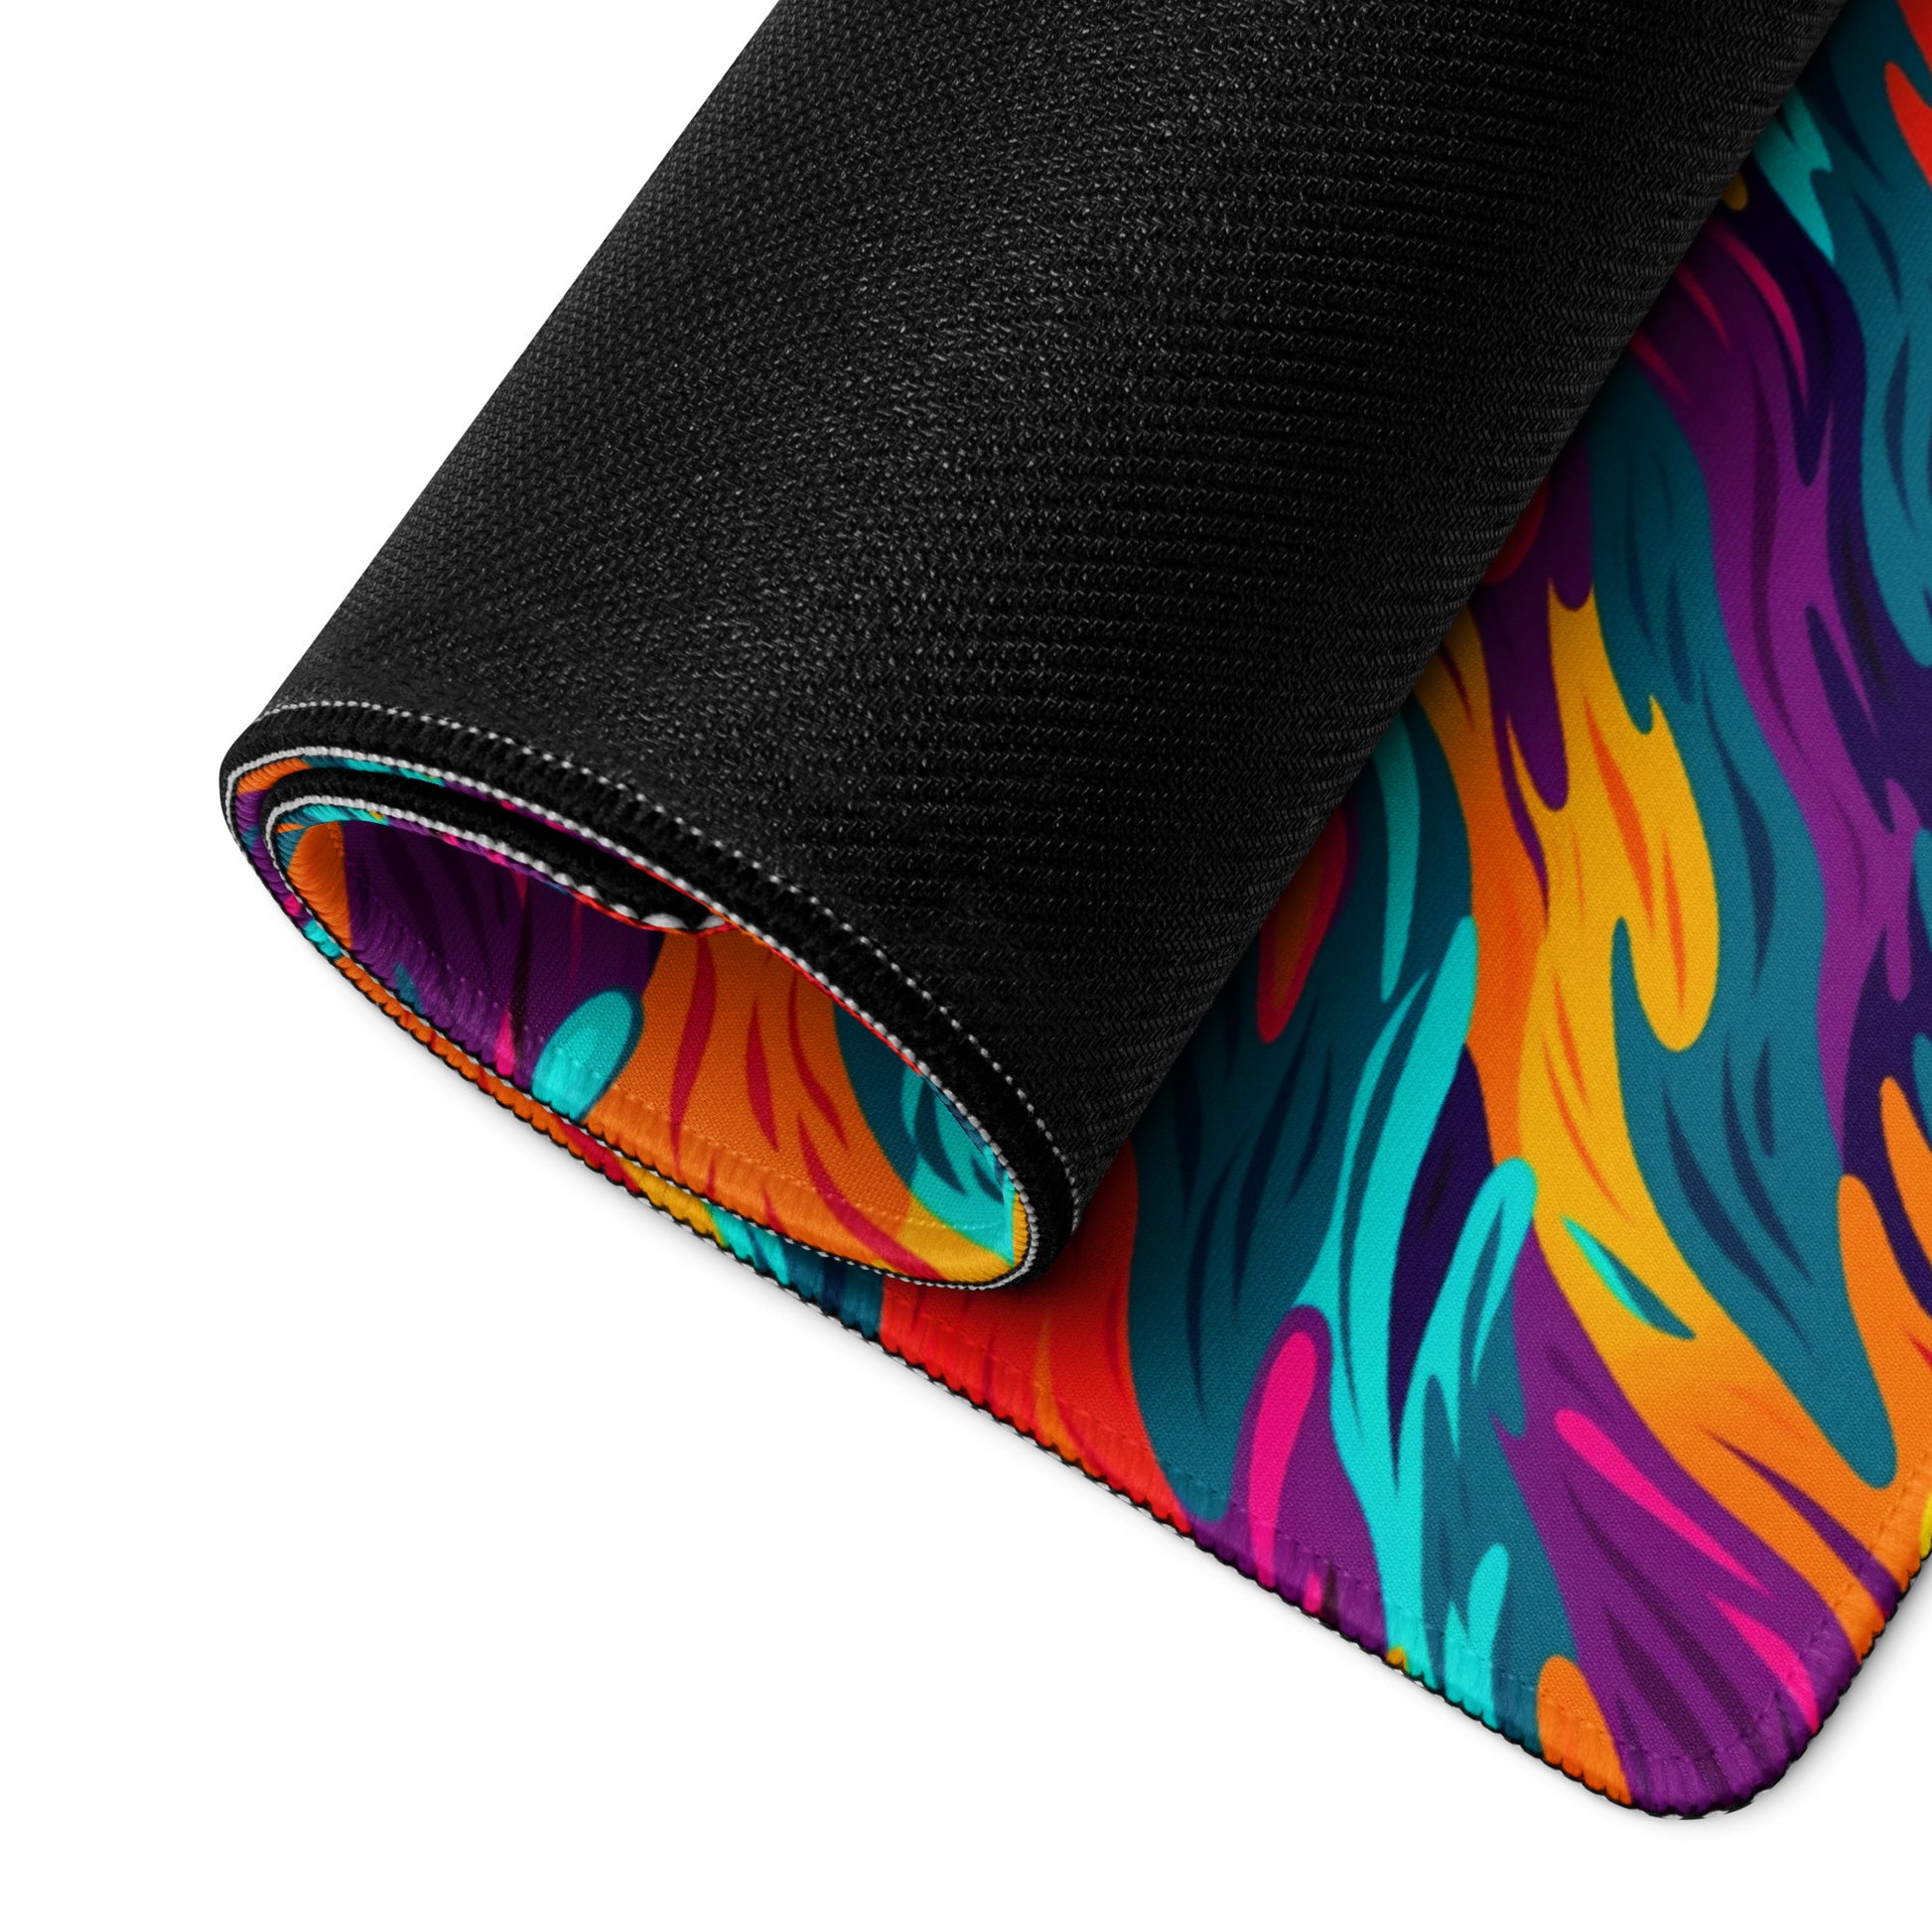 A desk pad with a wavy flame pattern on it rolled up. Rainbow in color.